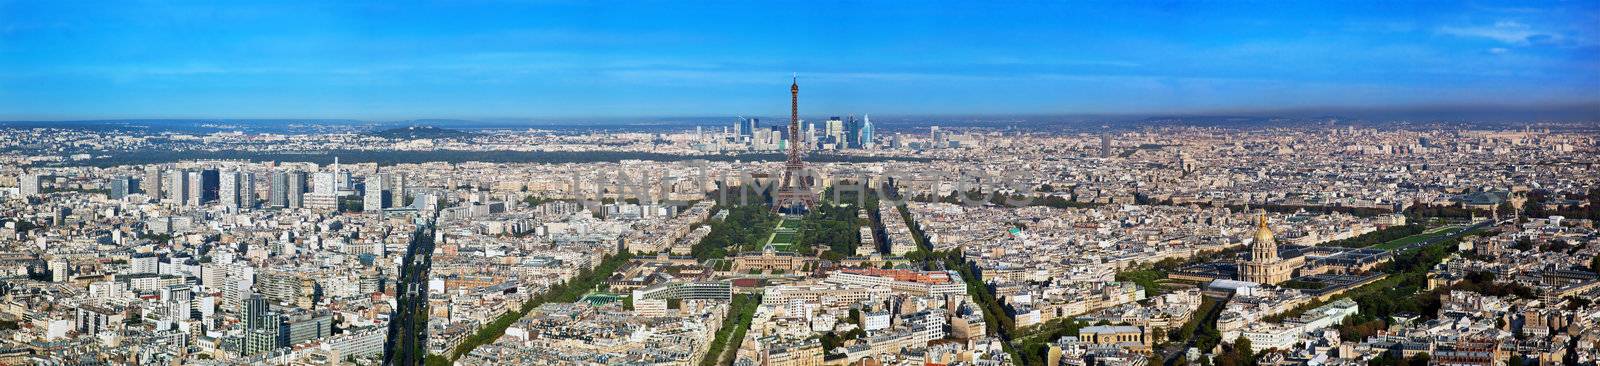 Paris panorama, France. View on Eiffel Tower, Les Invalides and La Defense from Montparnasse Tower.